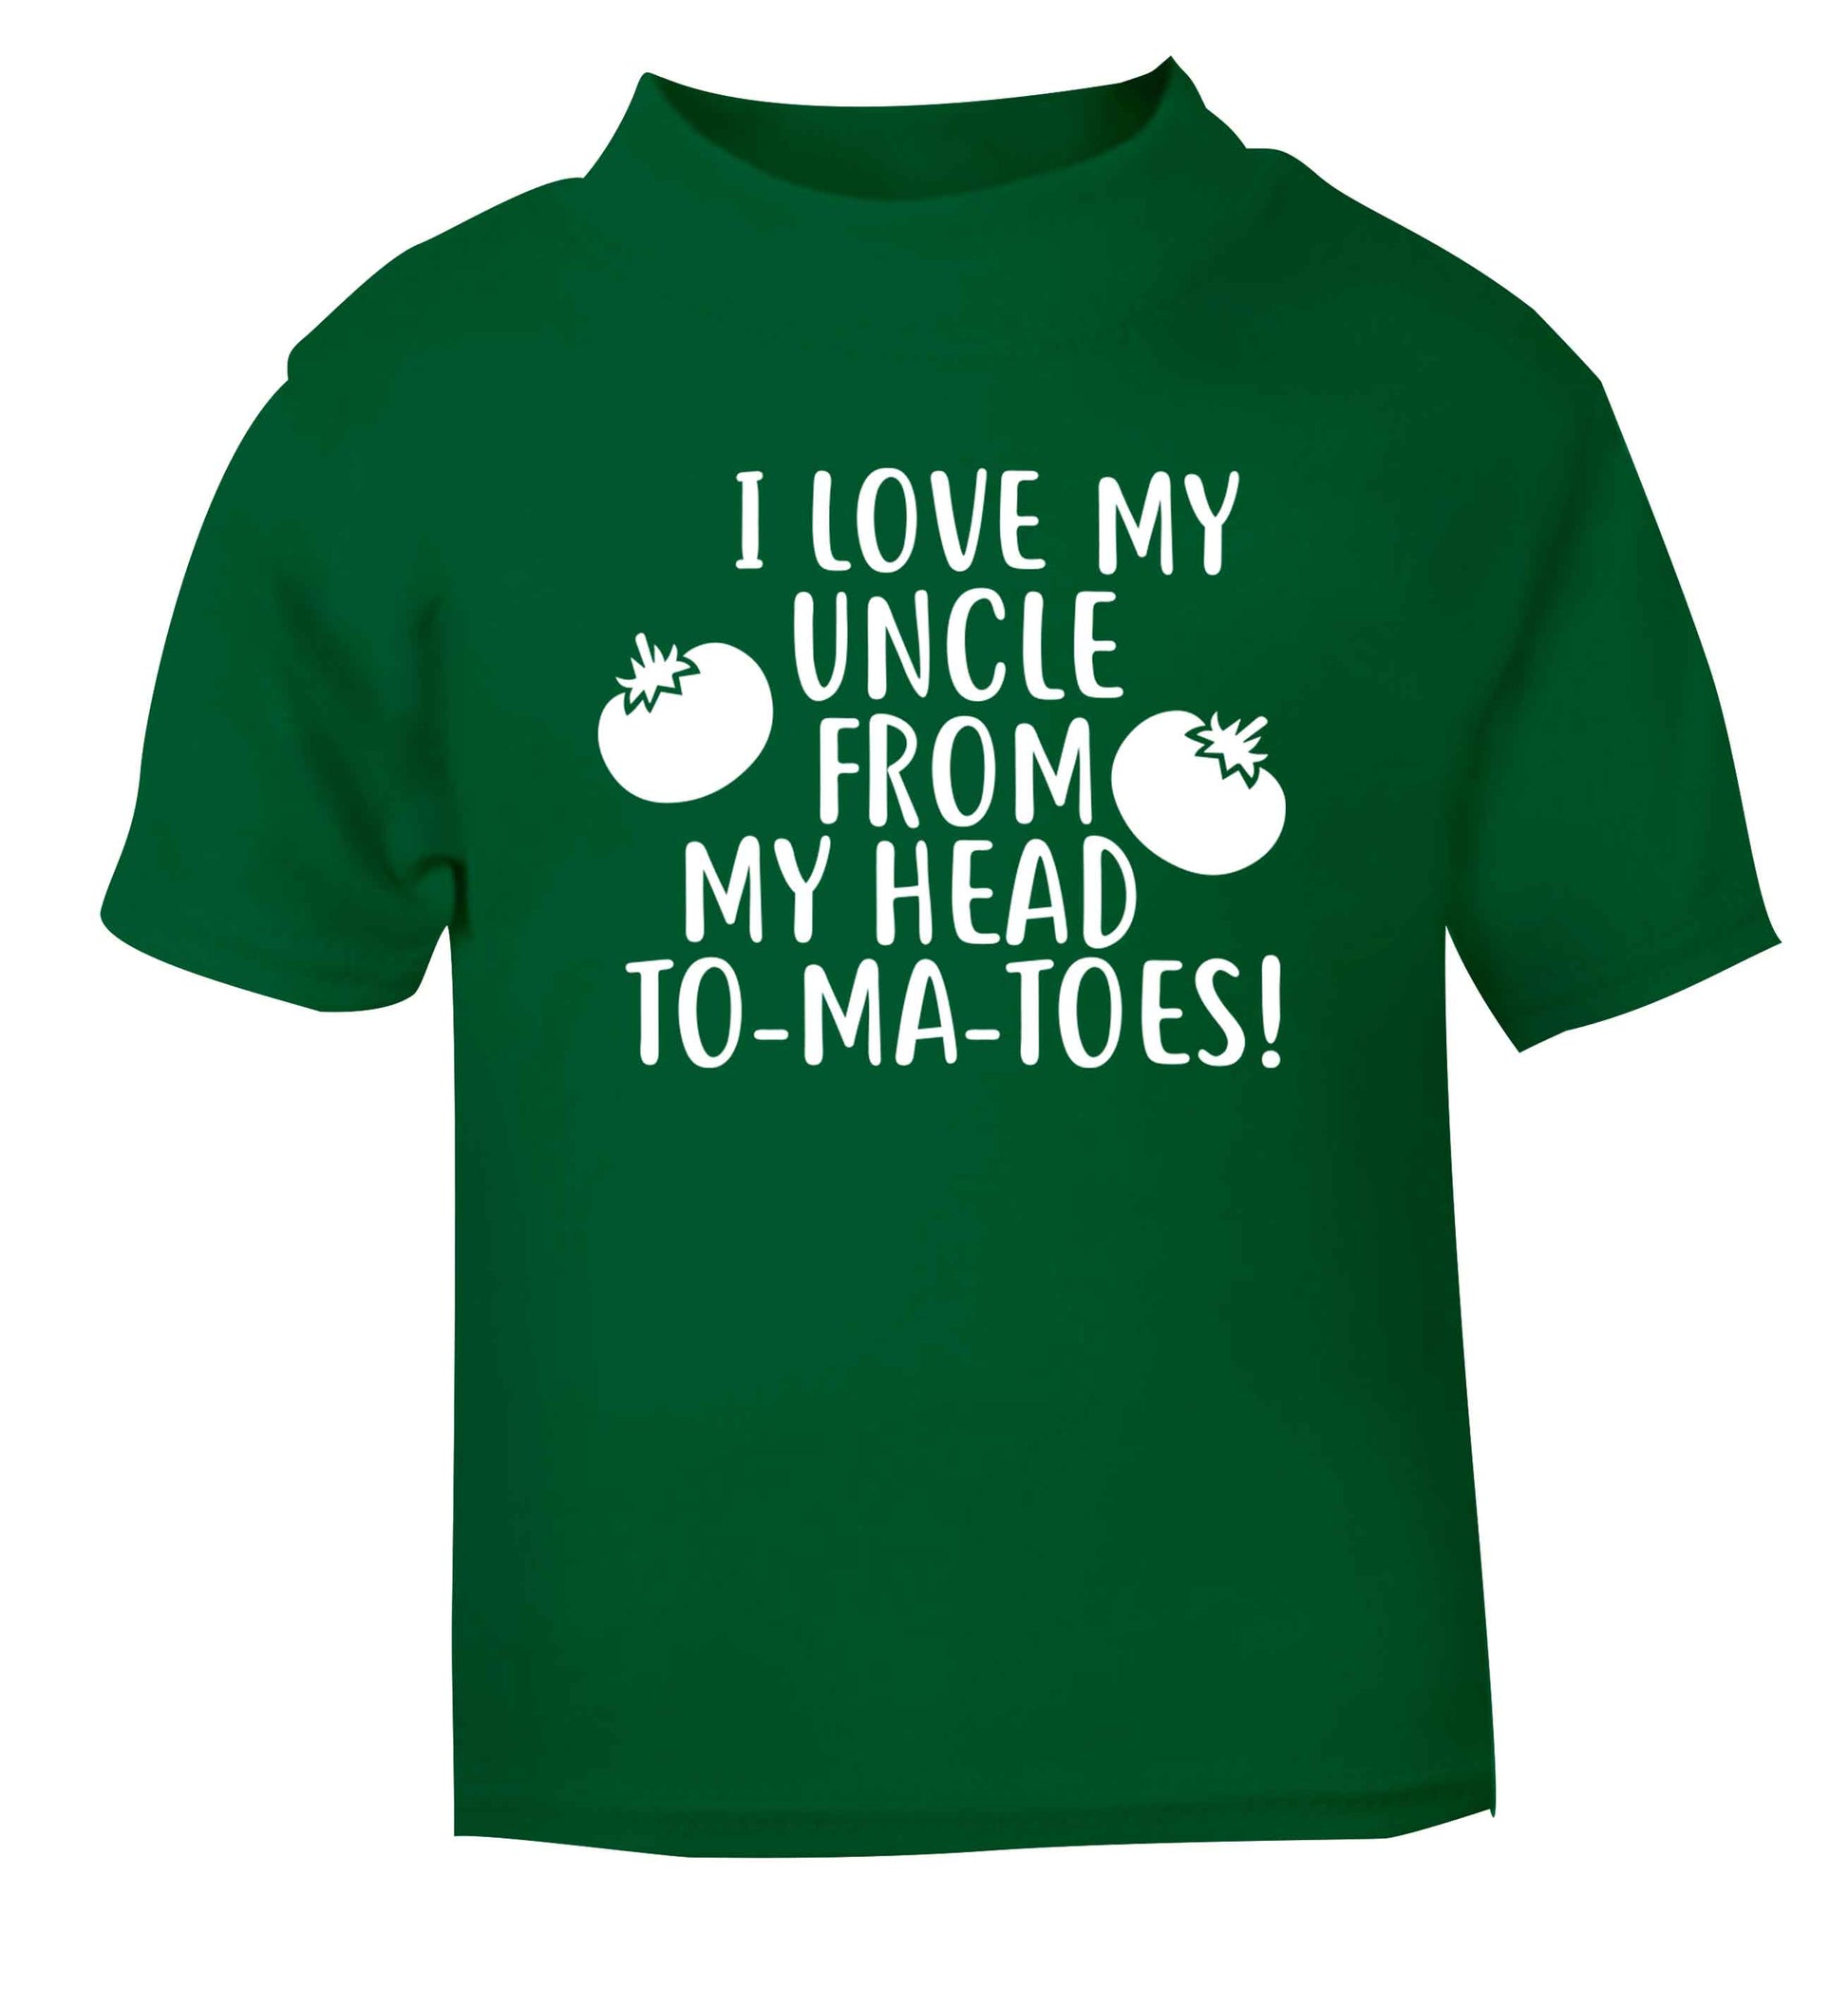 I love my uncle from my head To-Ma-Toes green Baby Toddler Tshirt 2 Years